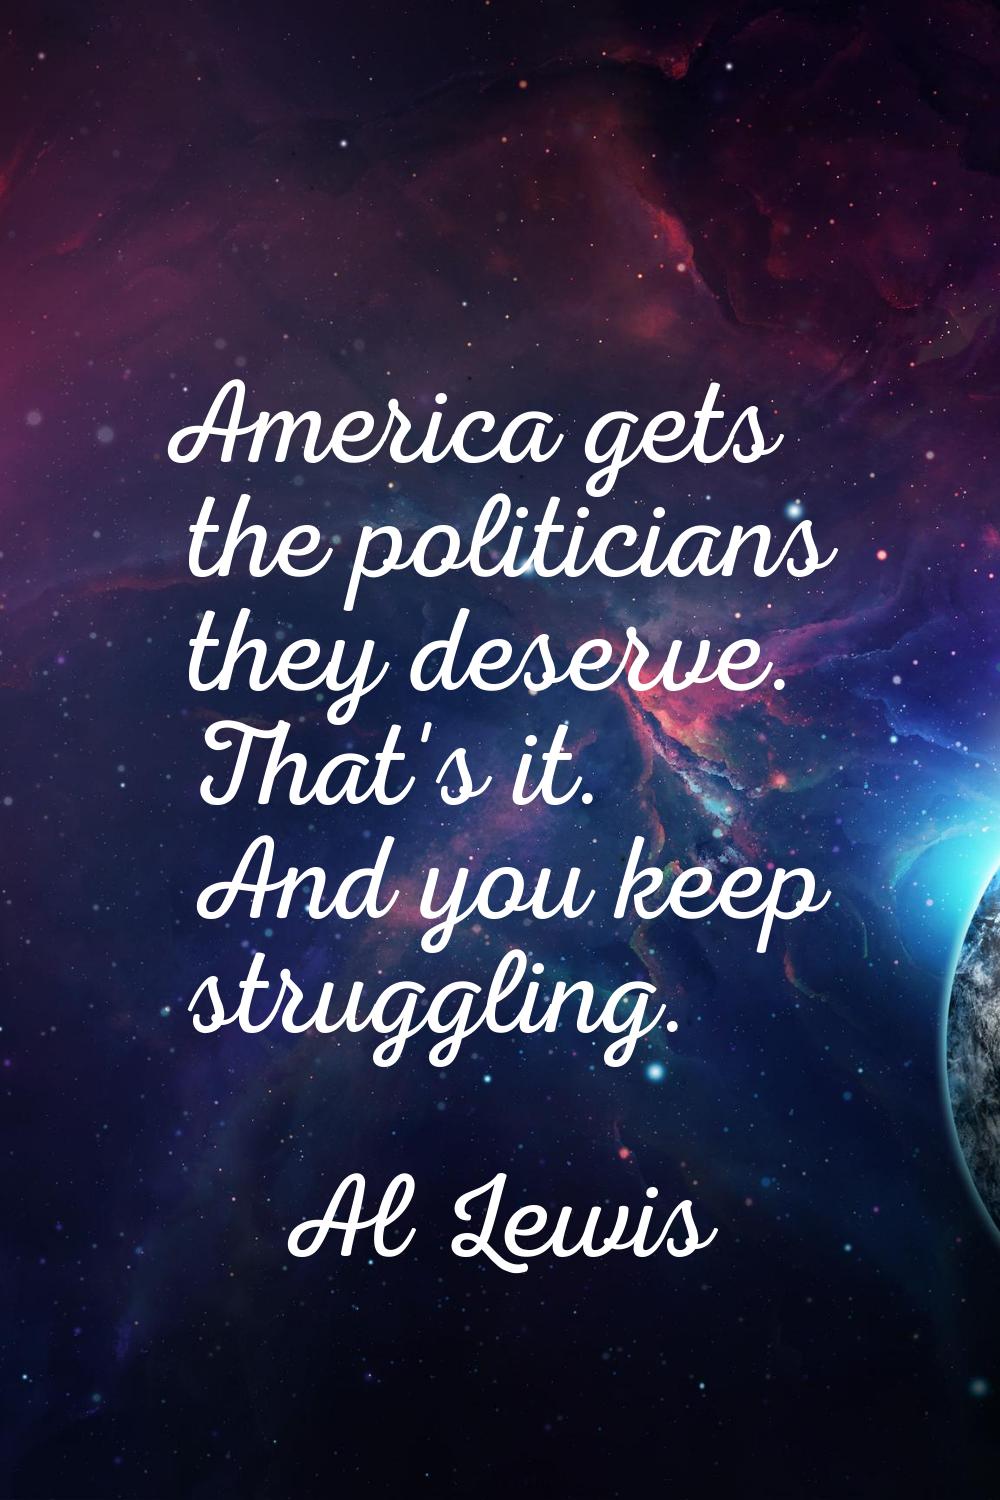 America gets the politicians they deserve. That's it. And you keep struggling.